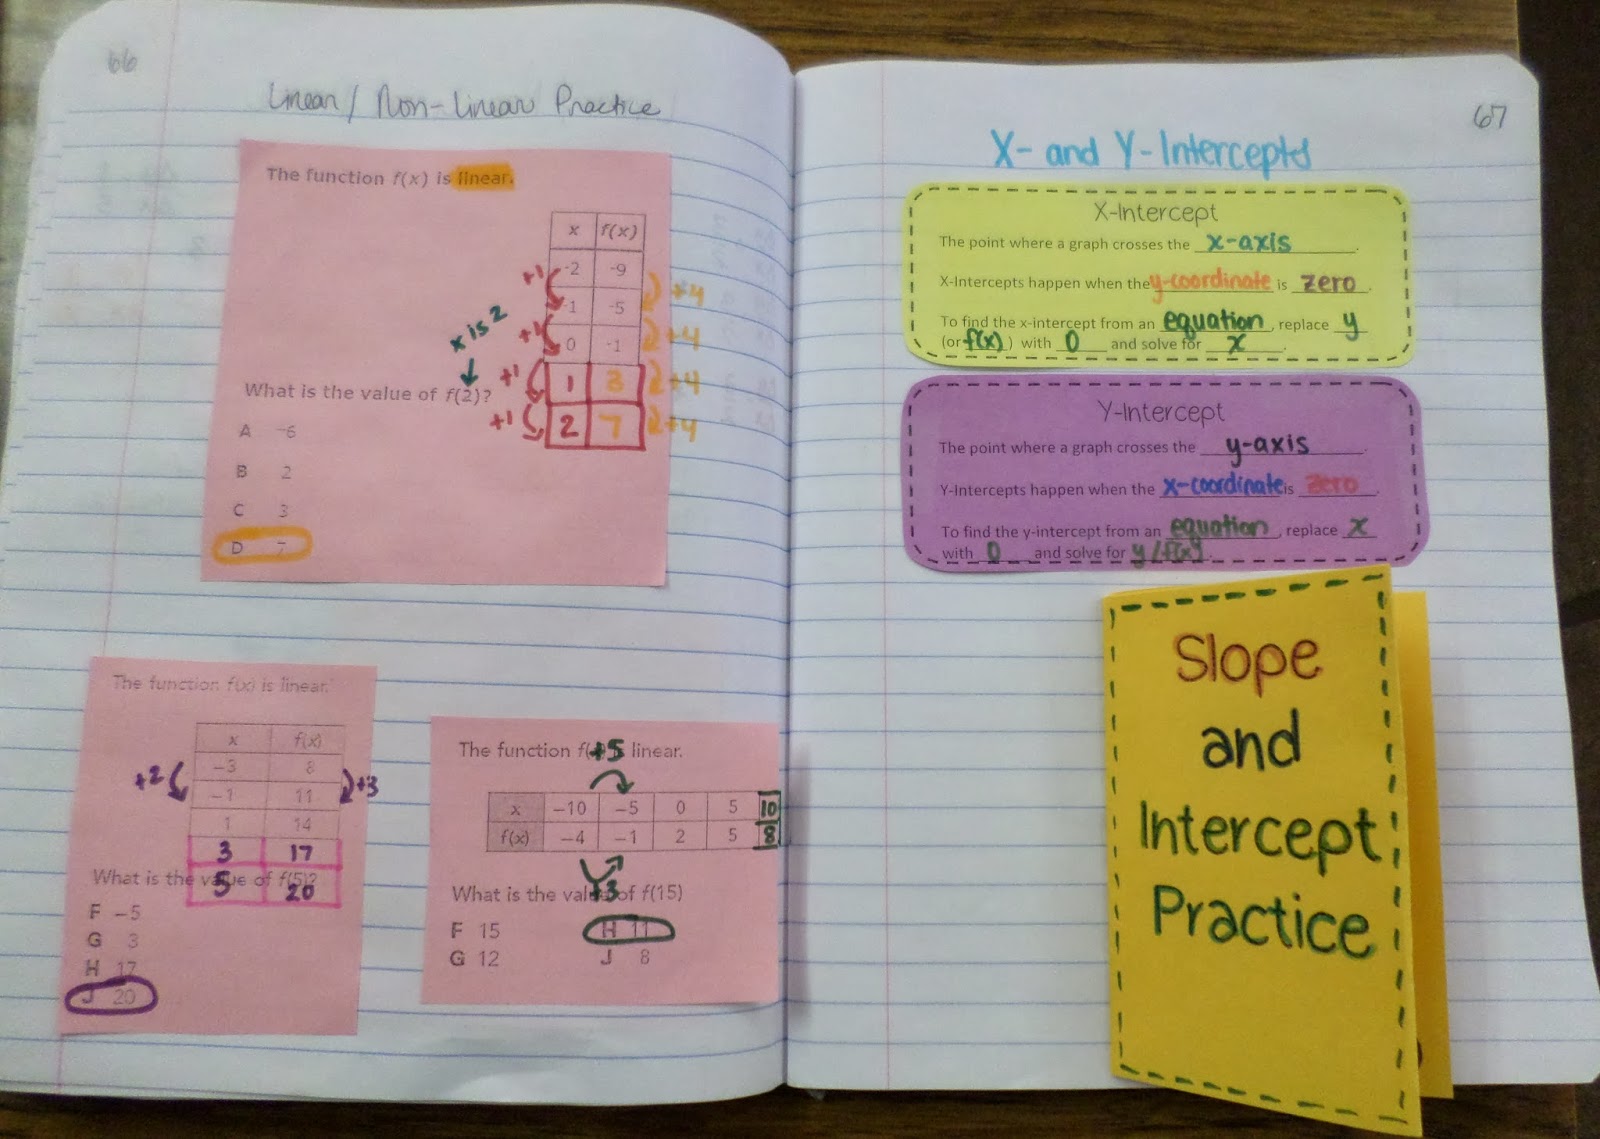 linear vs non-linear practice interactive notebook page for algebra 1 